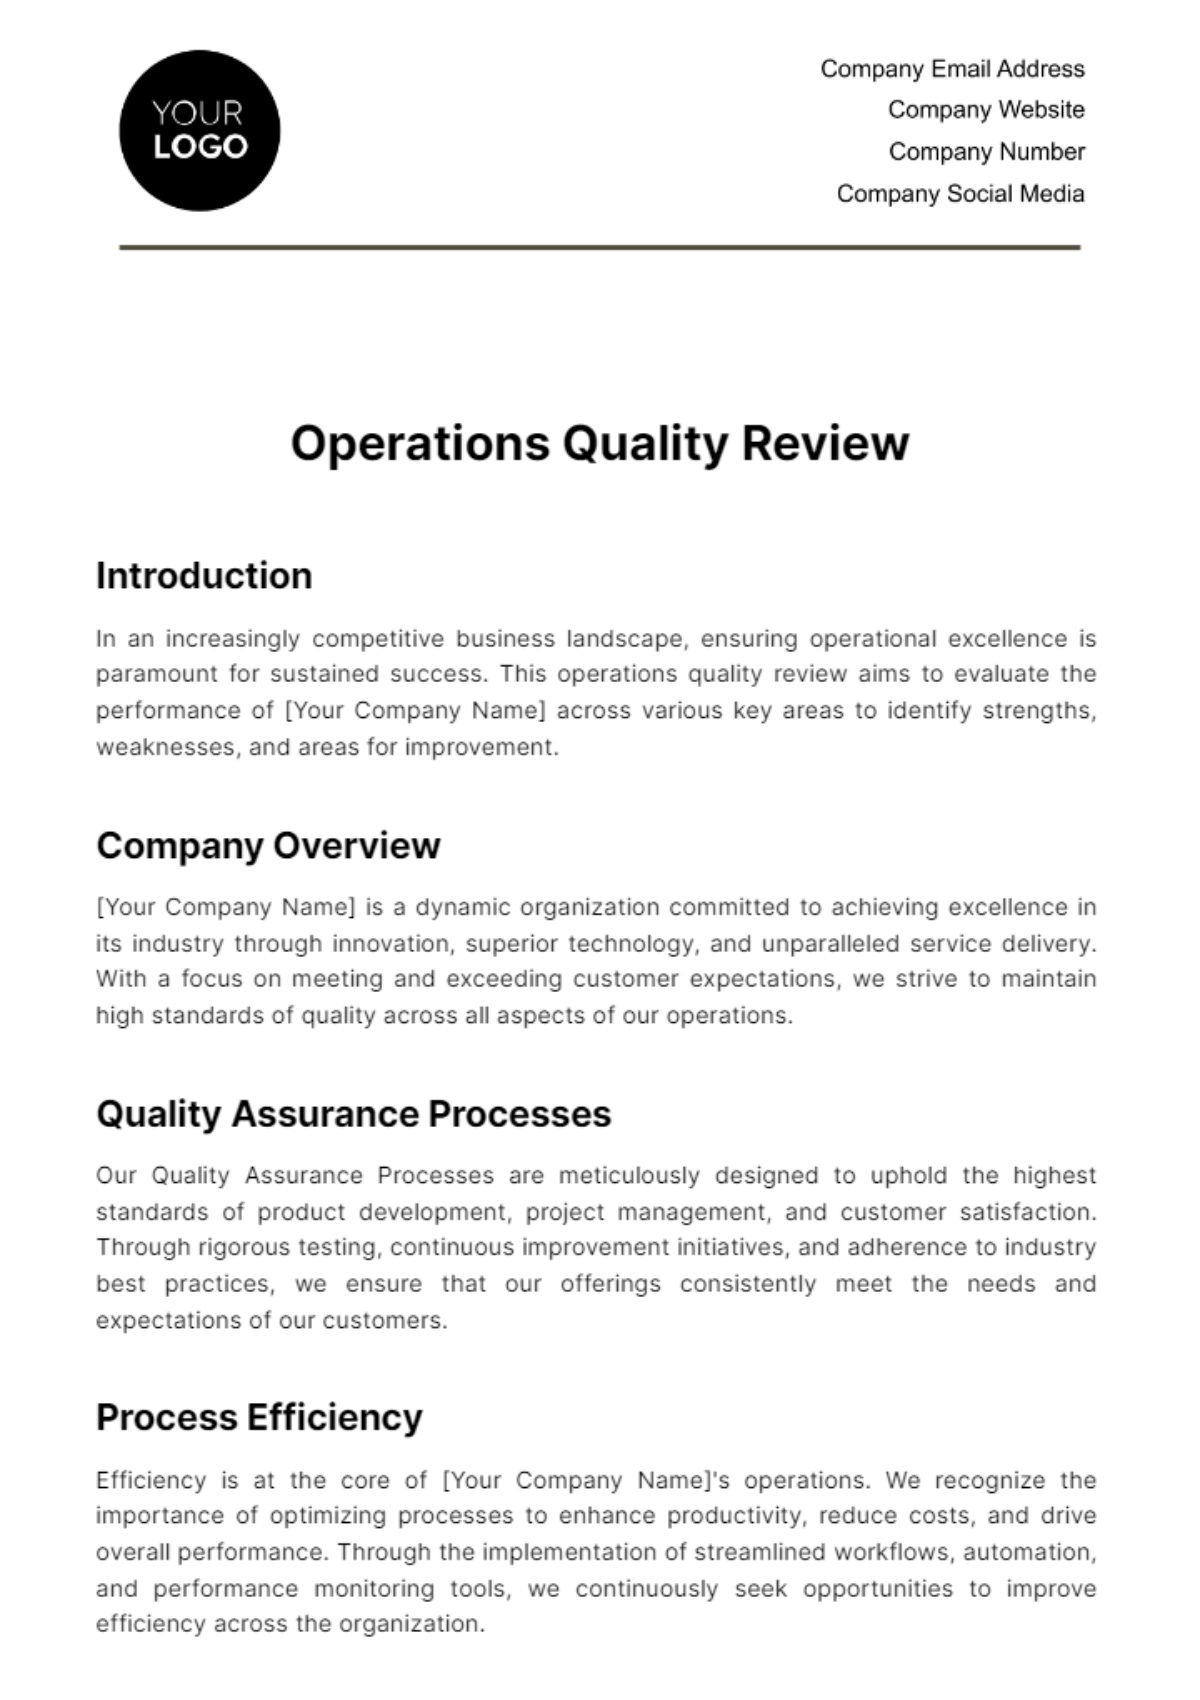 Operations Quality Review Template